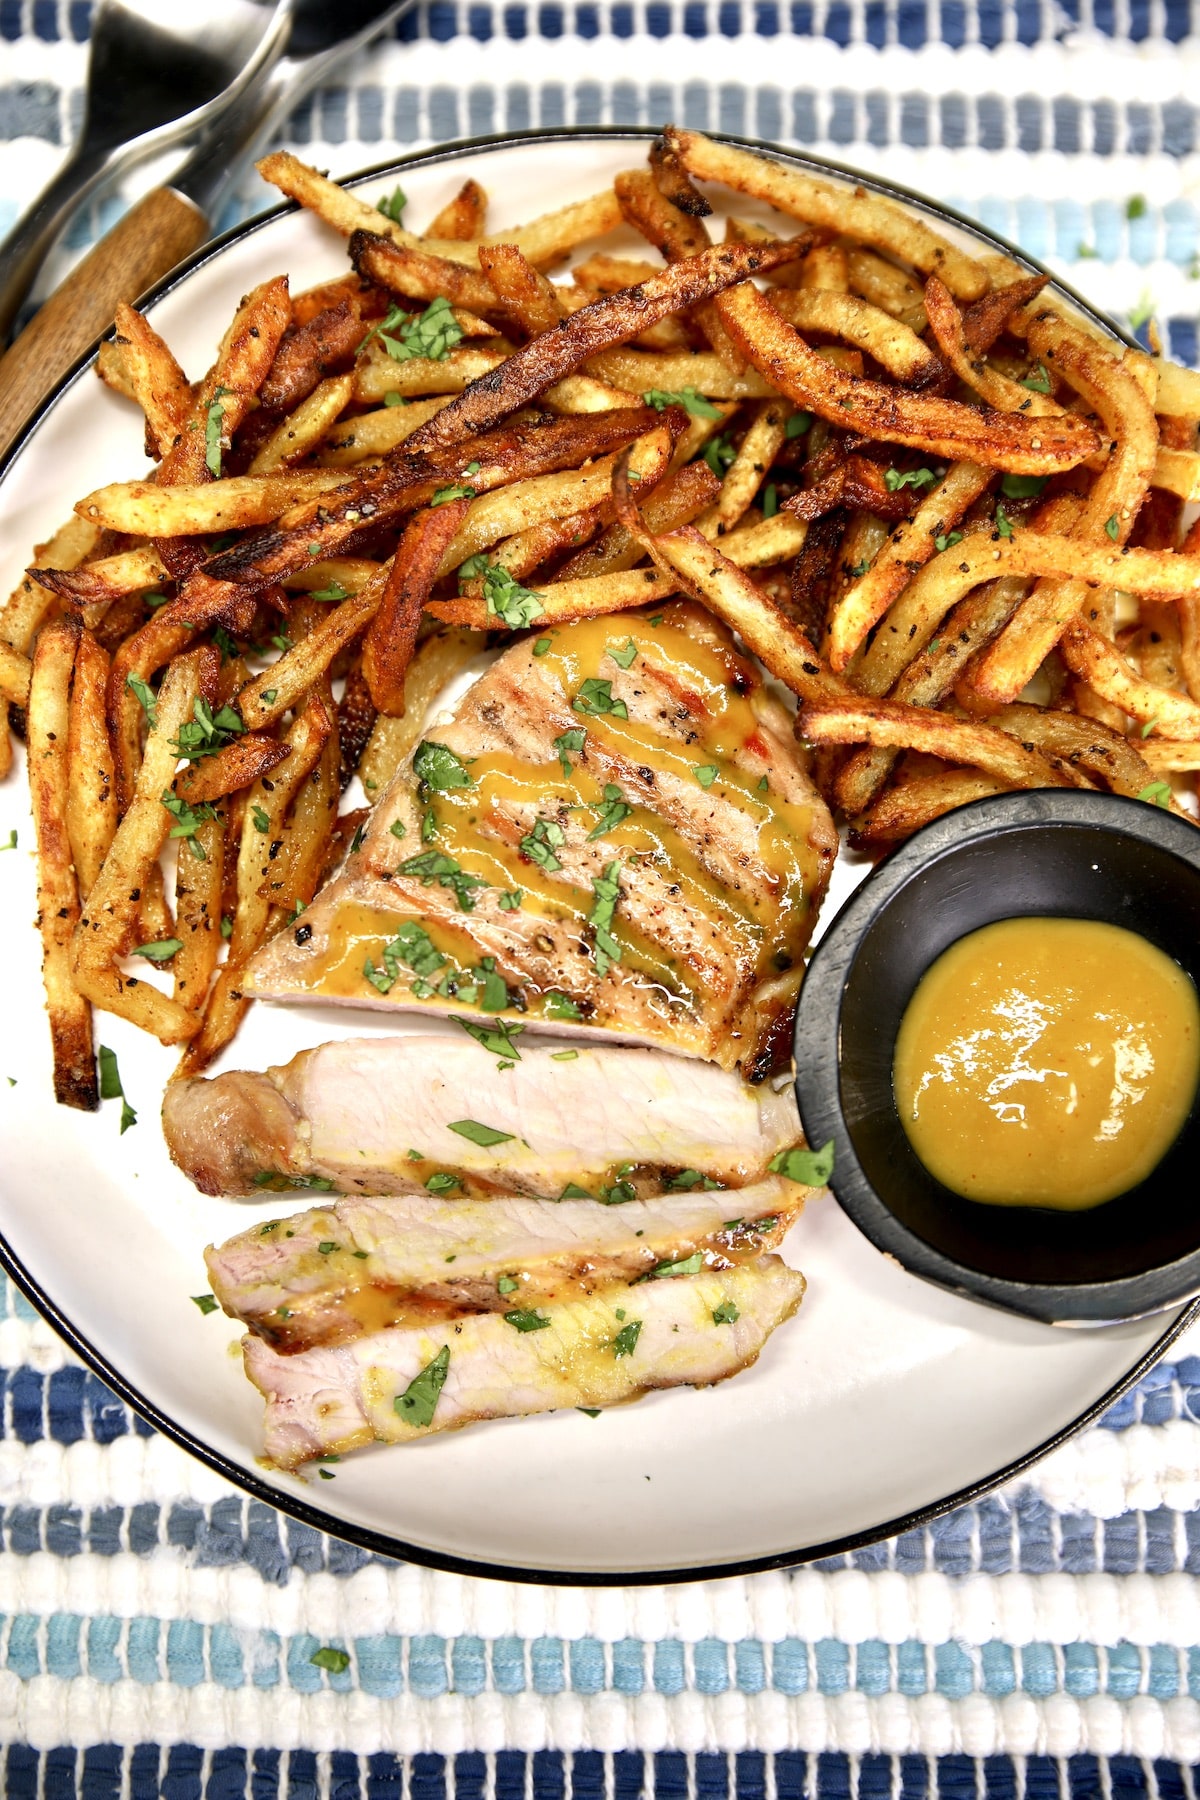 Plate of fries with pork chop, partially sliced.